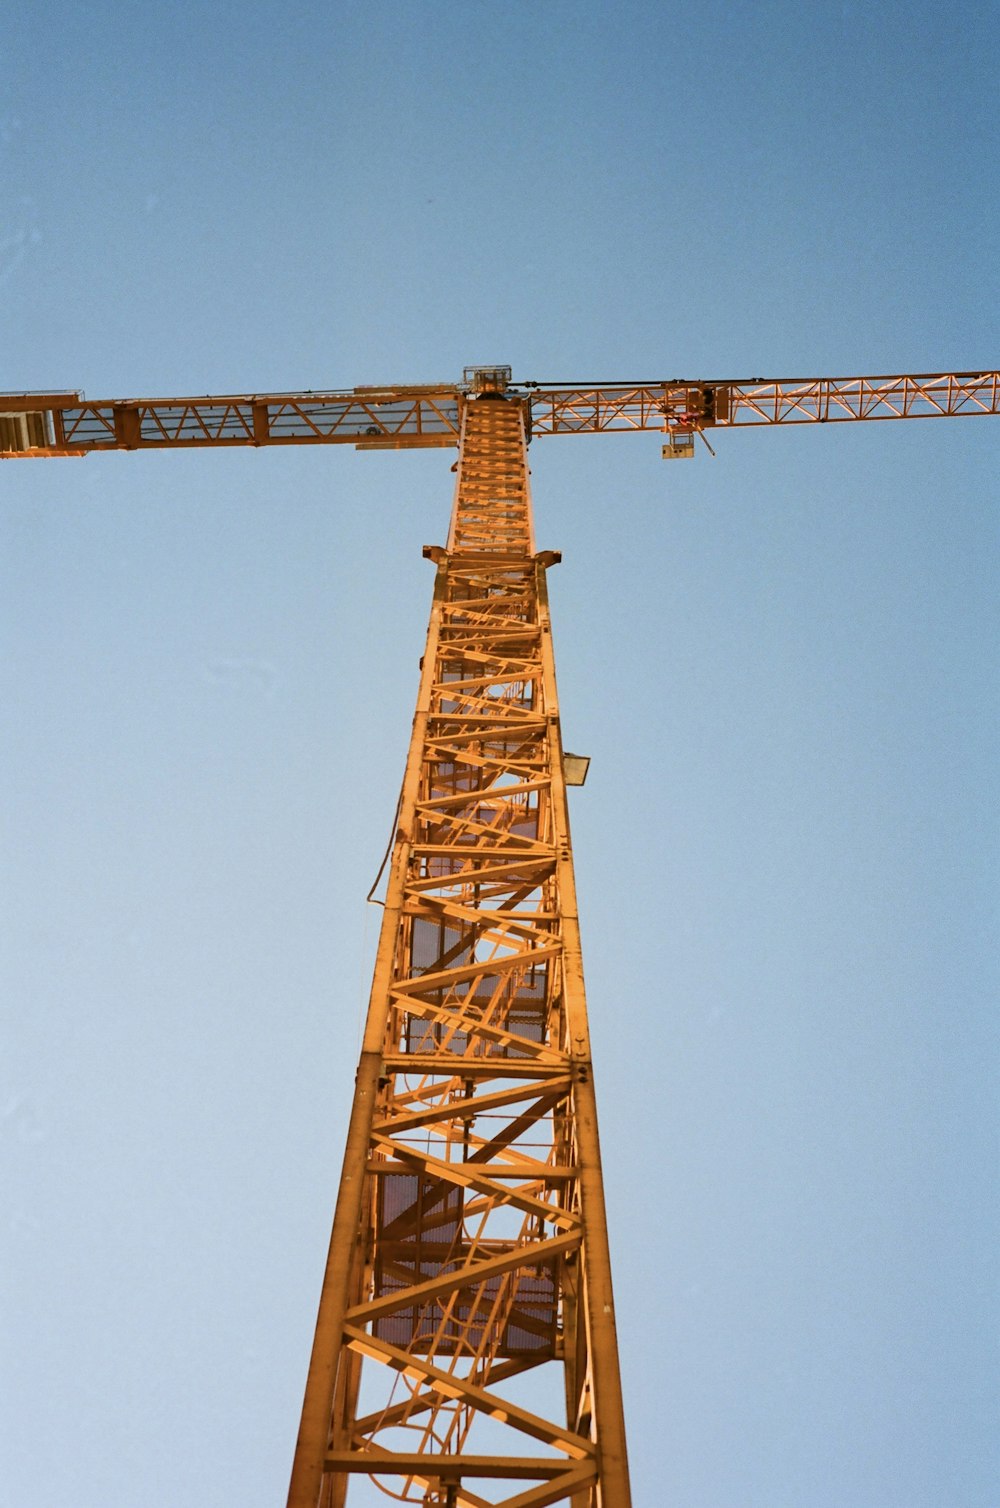 a tall tower with a crane on top of it